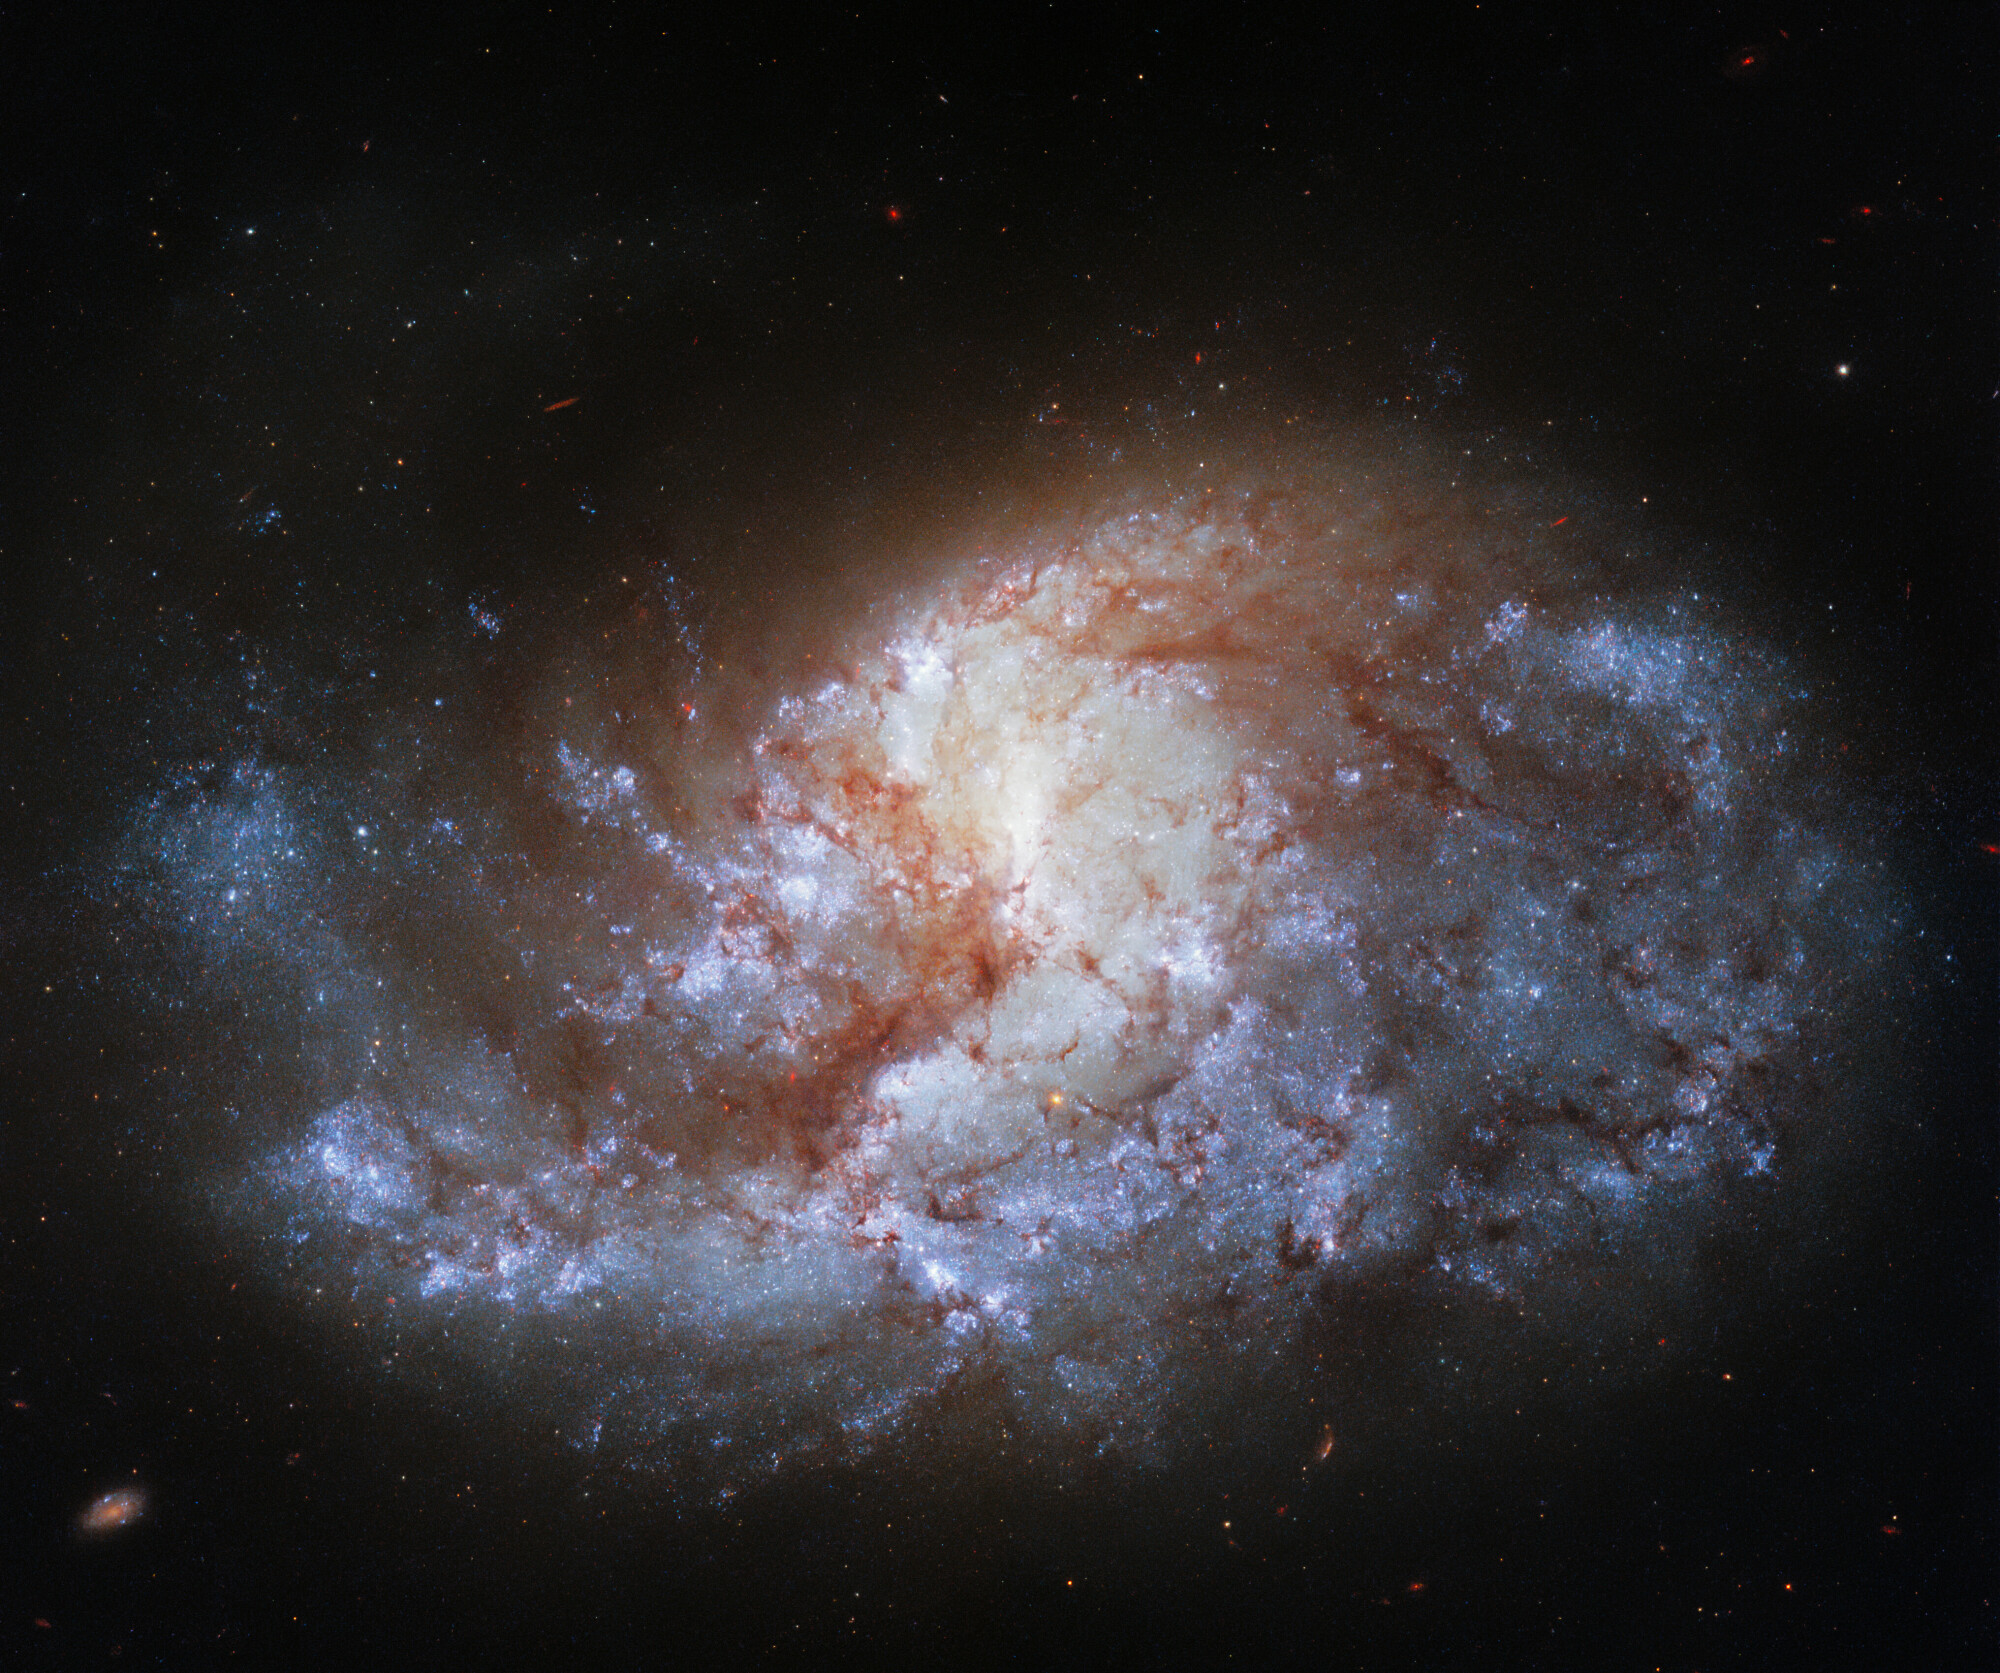 Sixty-eight million light-years from Earth, the spiral galaxy NGC 1385, shines in a constellation named Fornax, which is the Latin word for furnace.